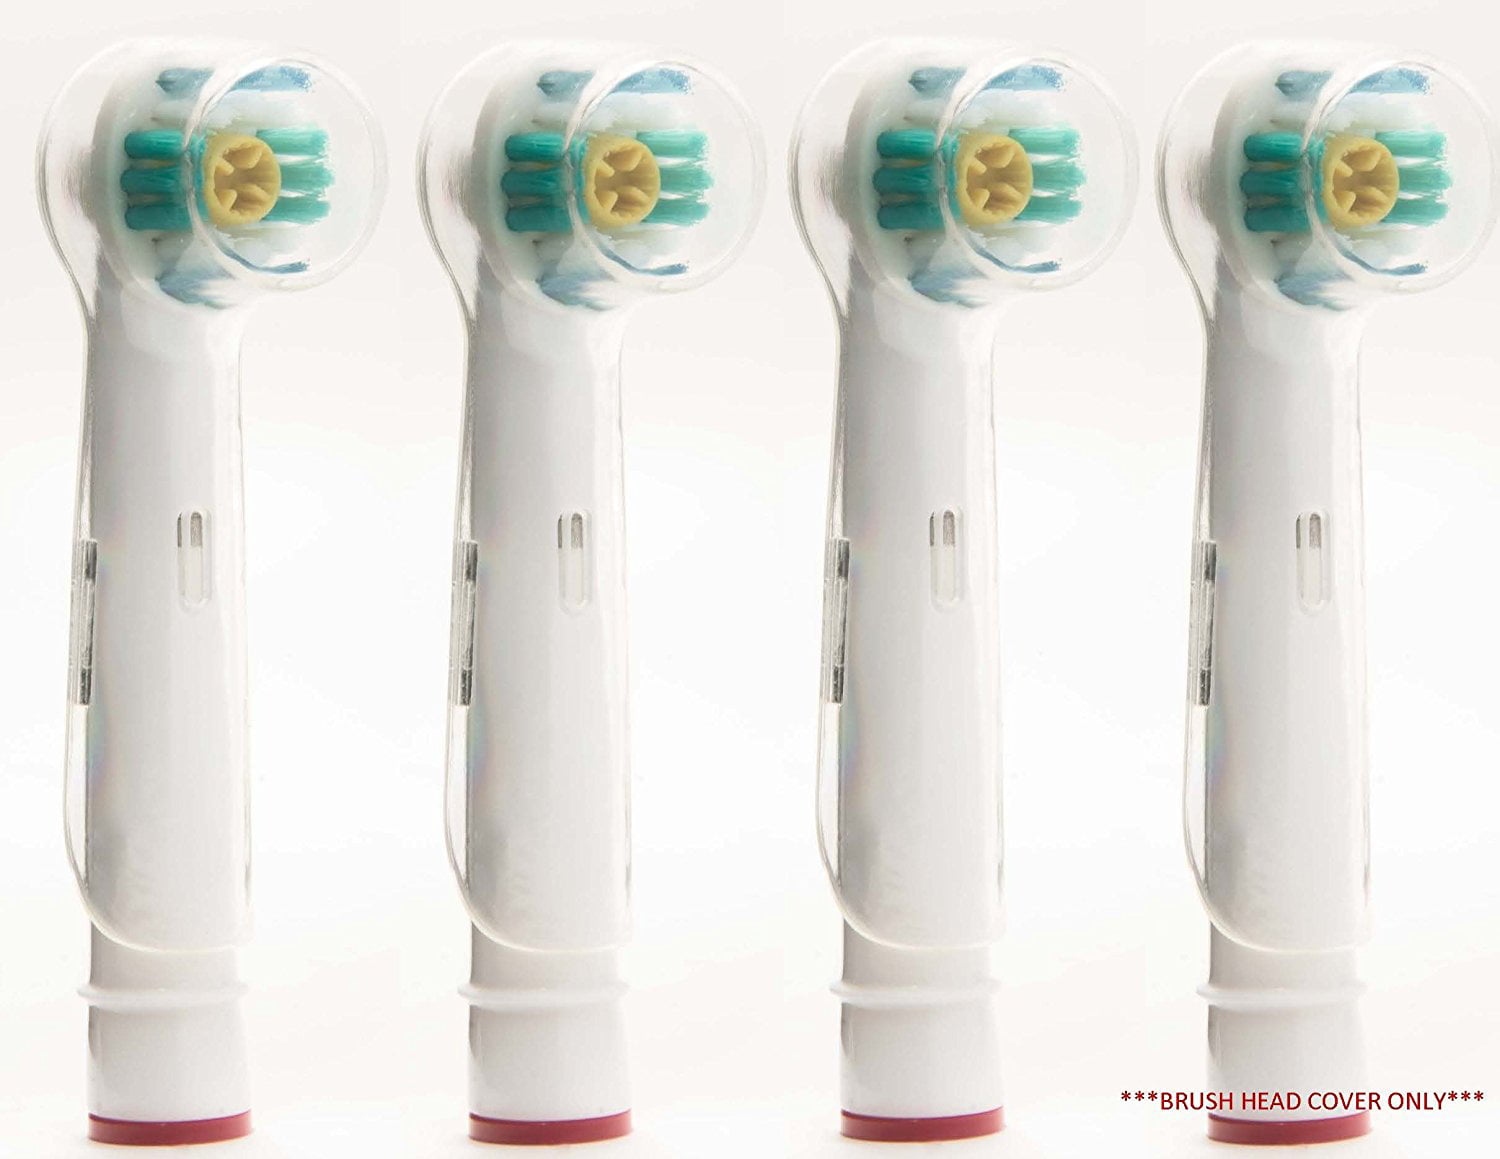 New Dustproof Electric Toothbrush Heads Cover Oral Care For Oral-B Brush Head US 